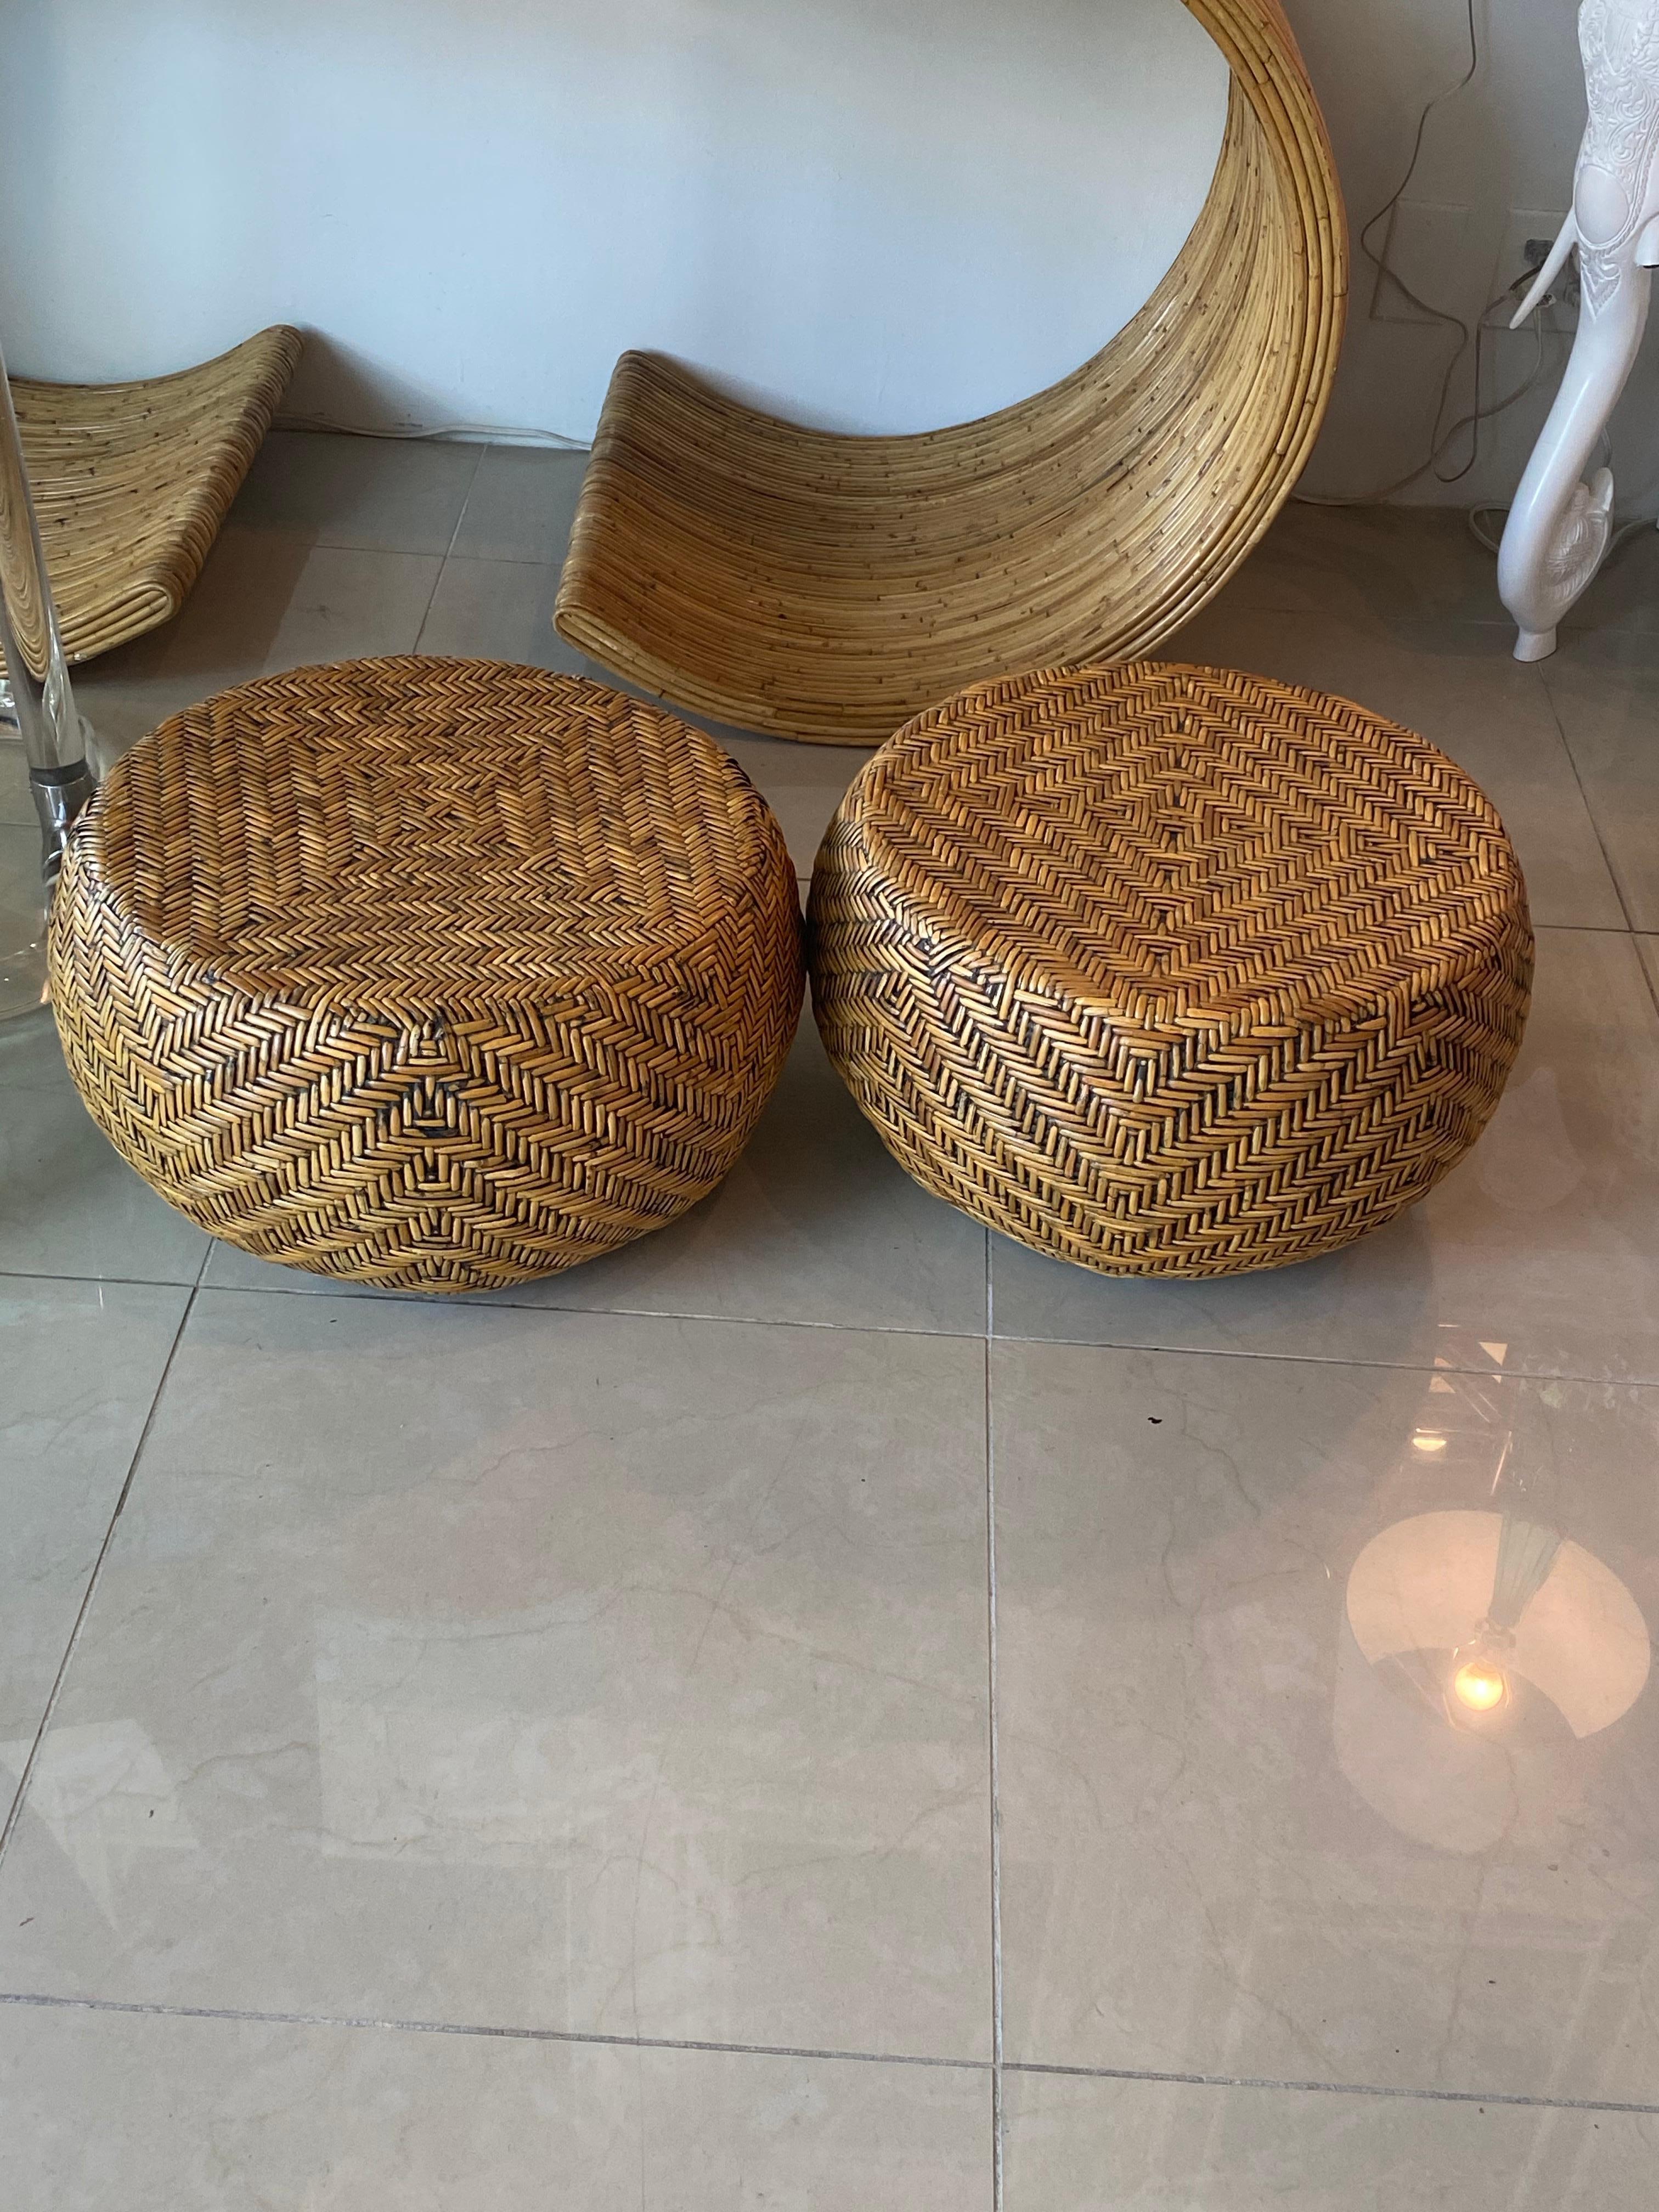 Late 20th Century Vintage Pair of Woven Wicker Round Footstools Stools Benches Ottomans